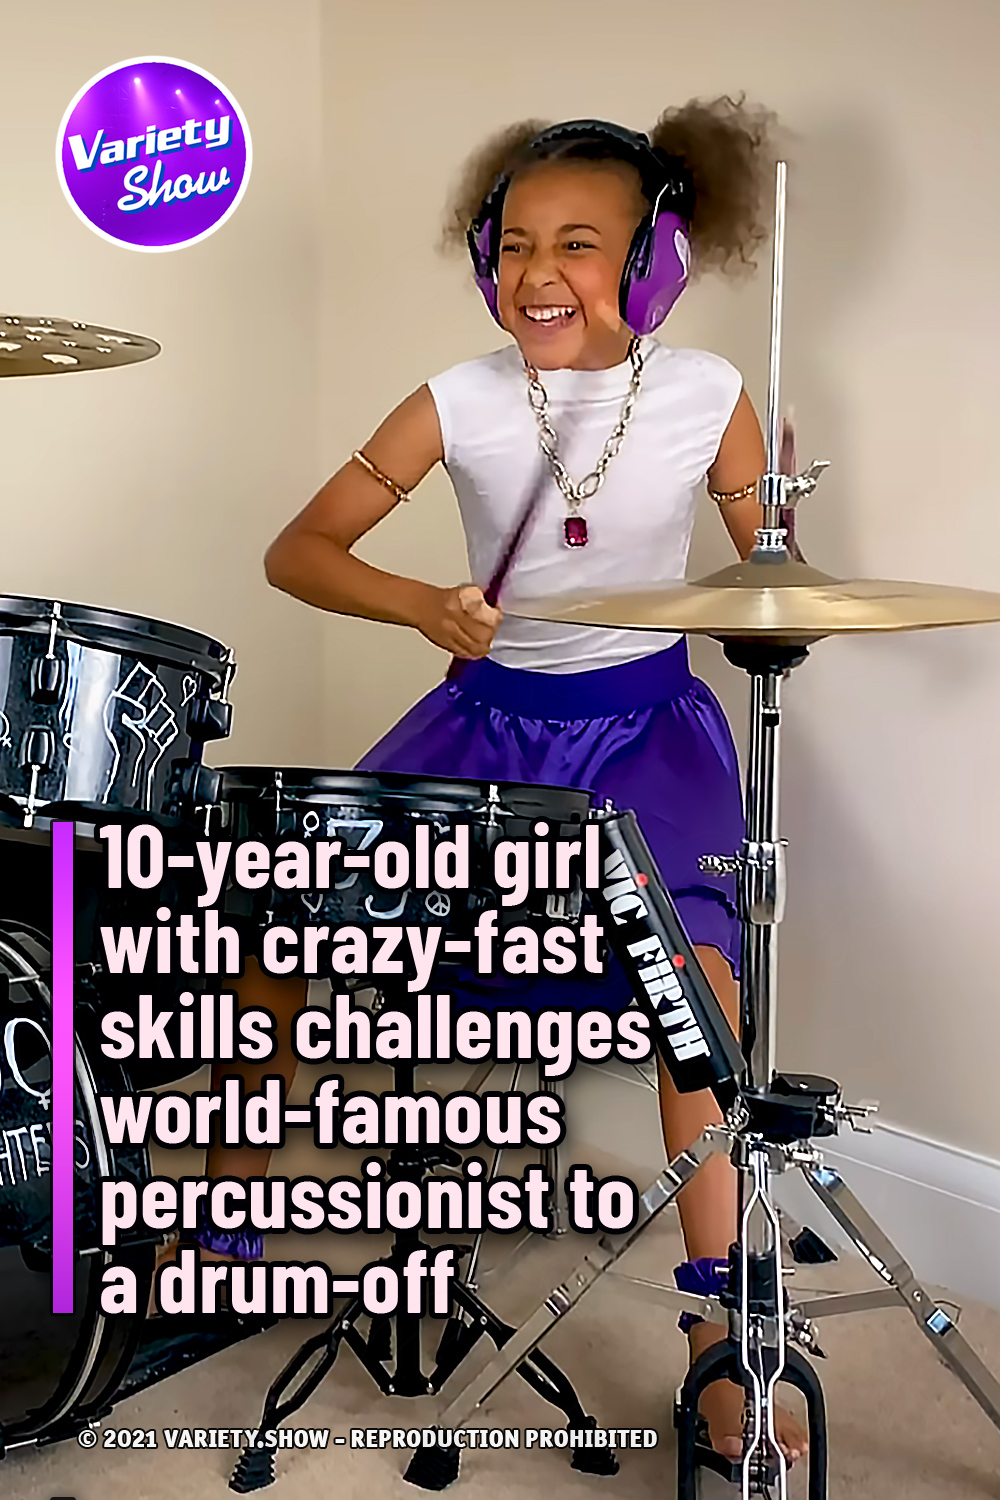 10-year-old girl with crazy-fast skills challenges world-famous percussionist to a drum-off